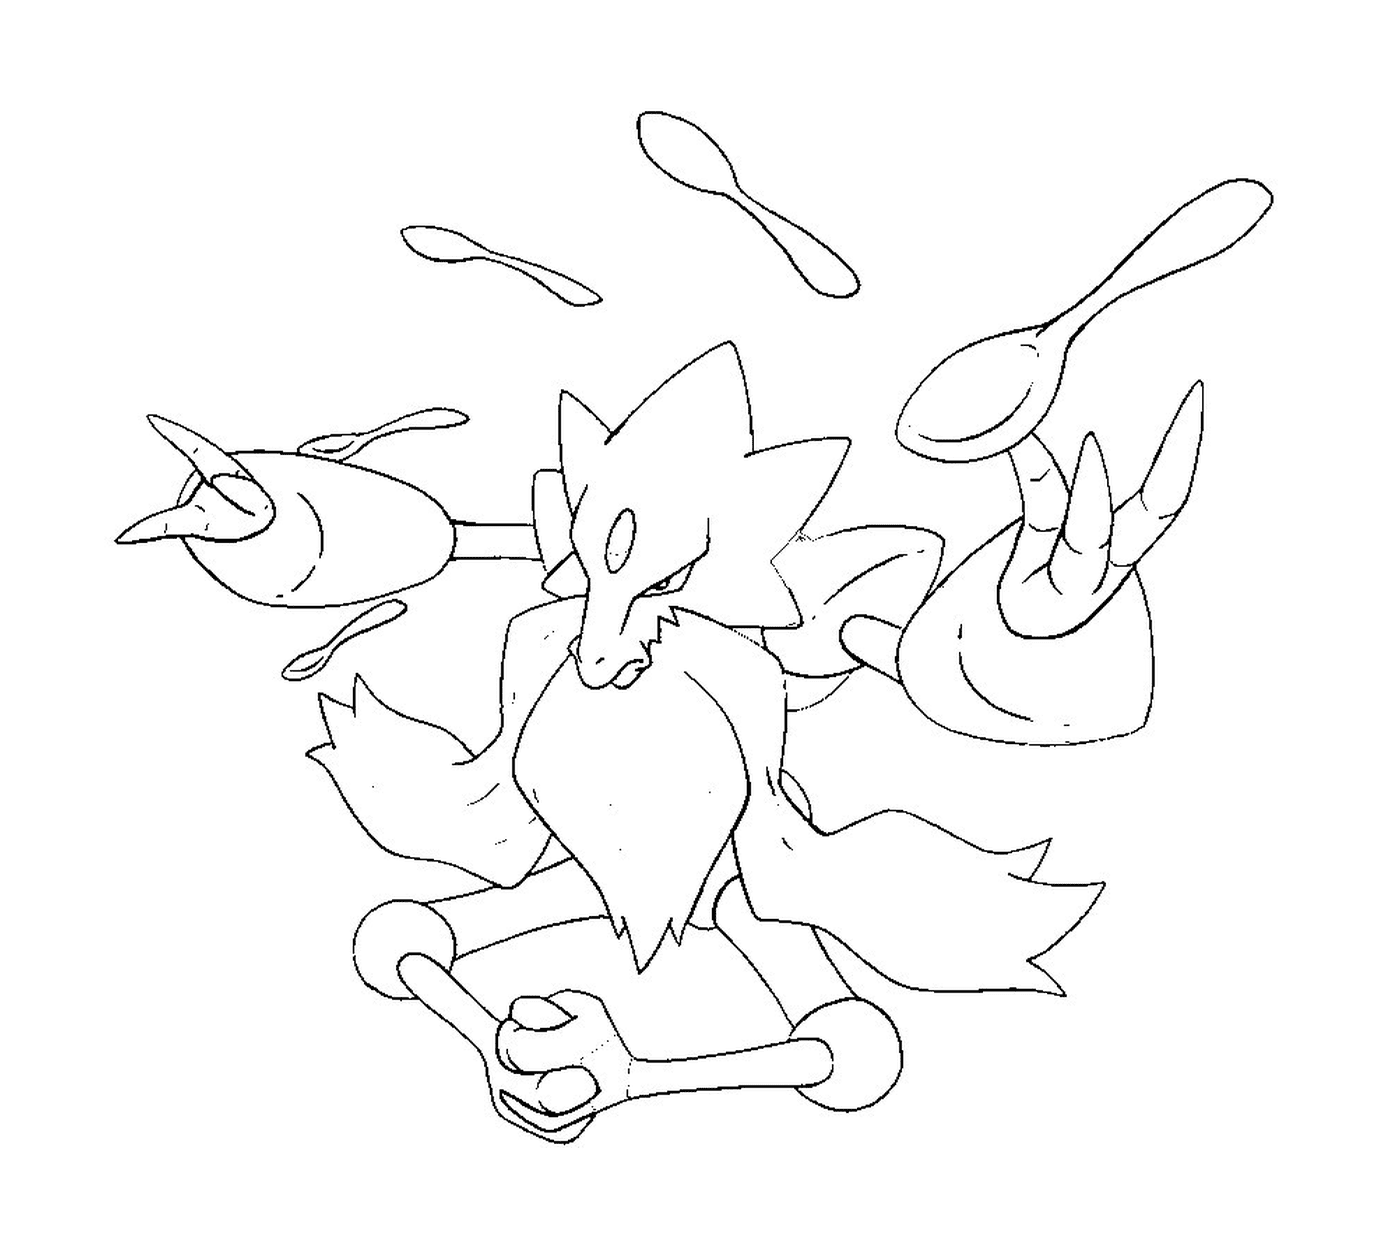  Alakazam, a fox surrounded by spoons 